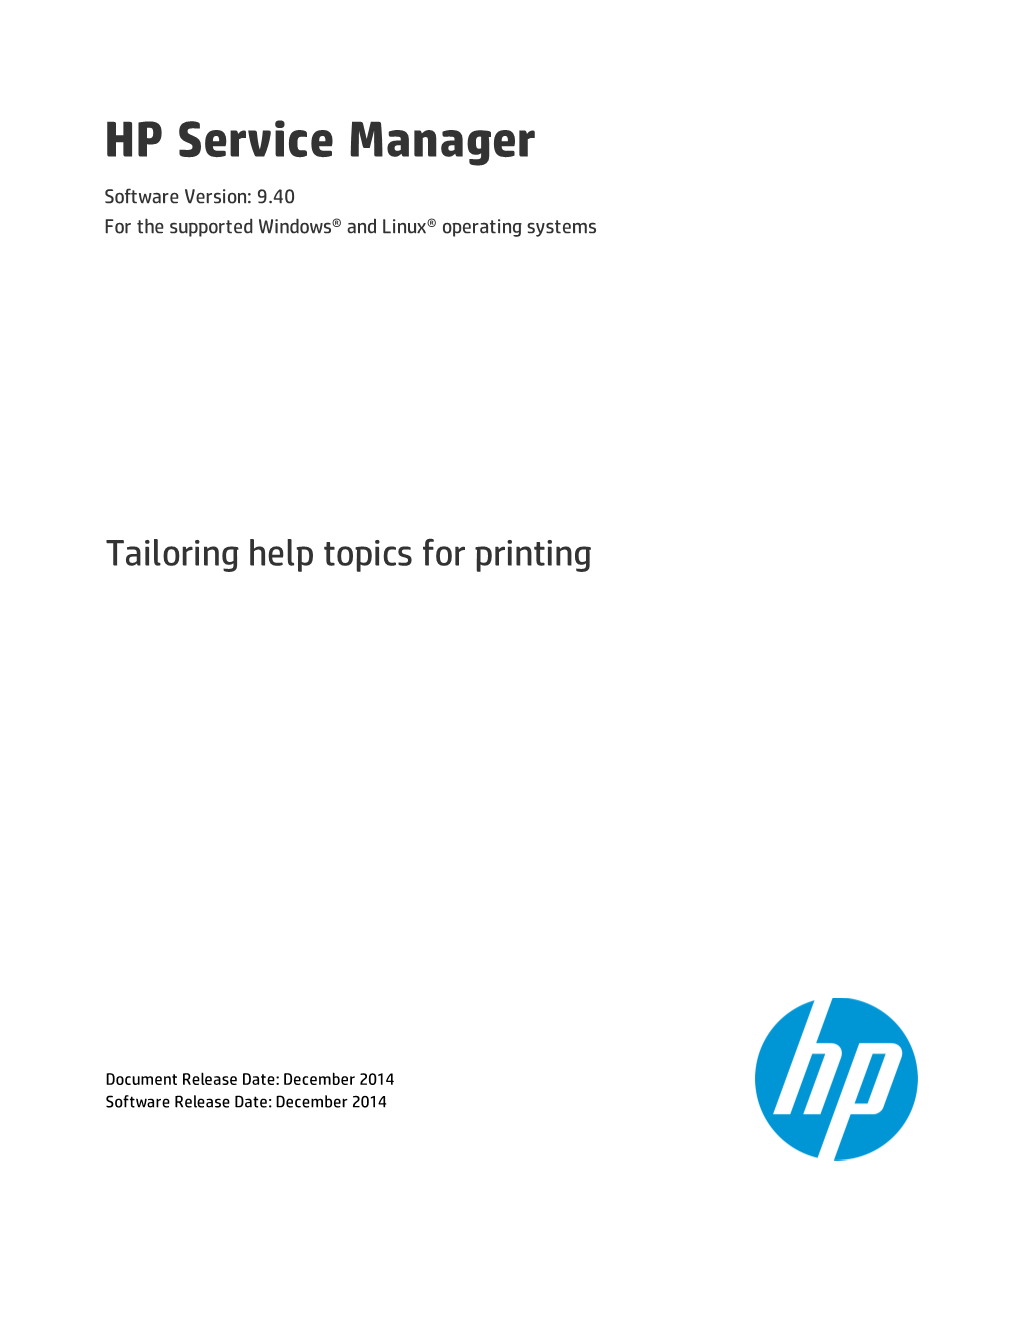 HPSM 9.40 – Tailoring Help Topics for Printing